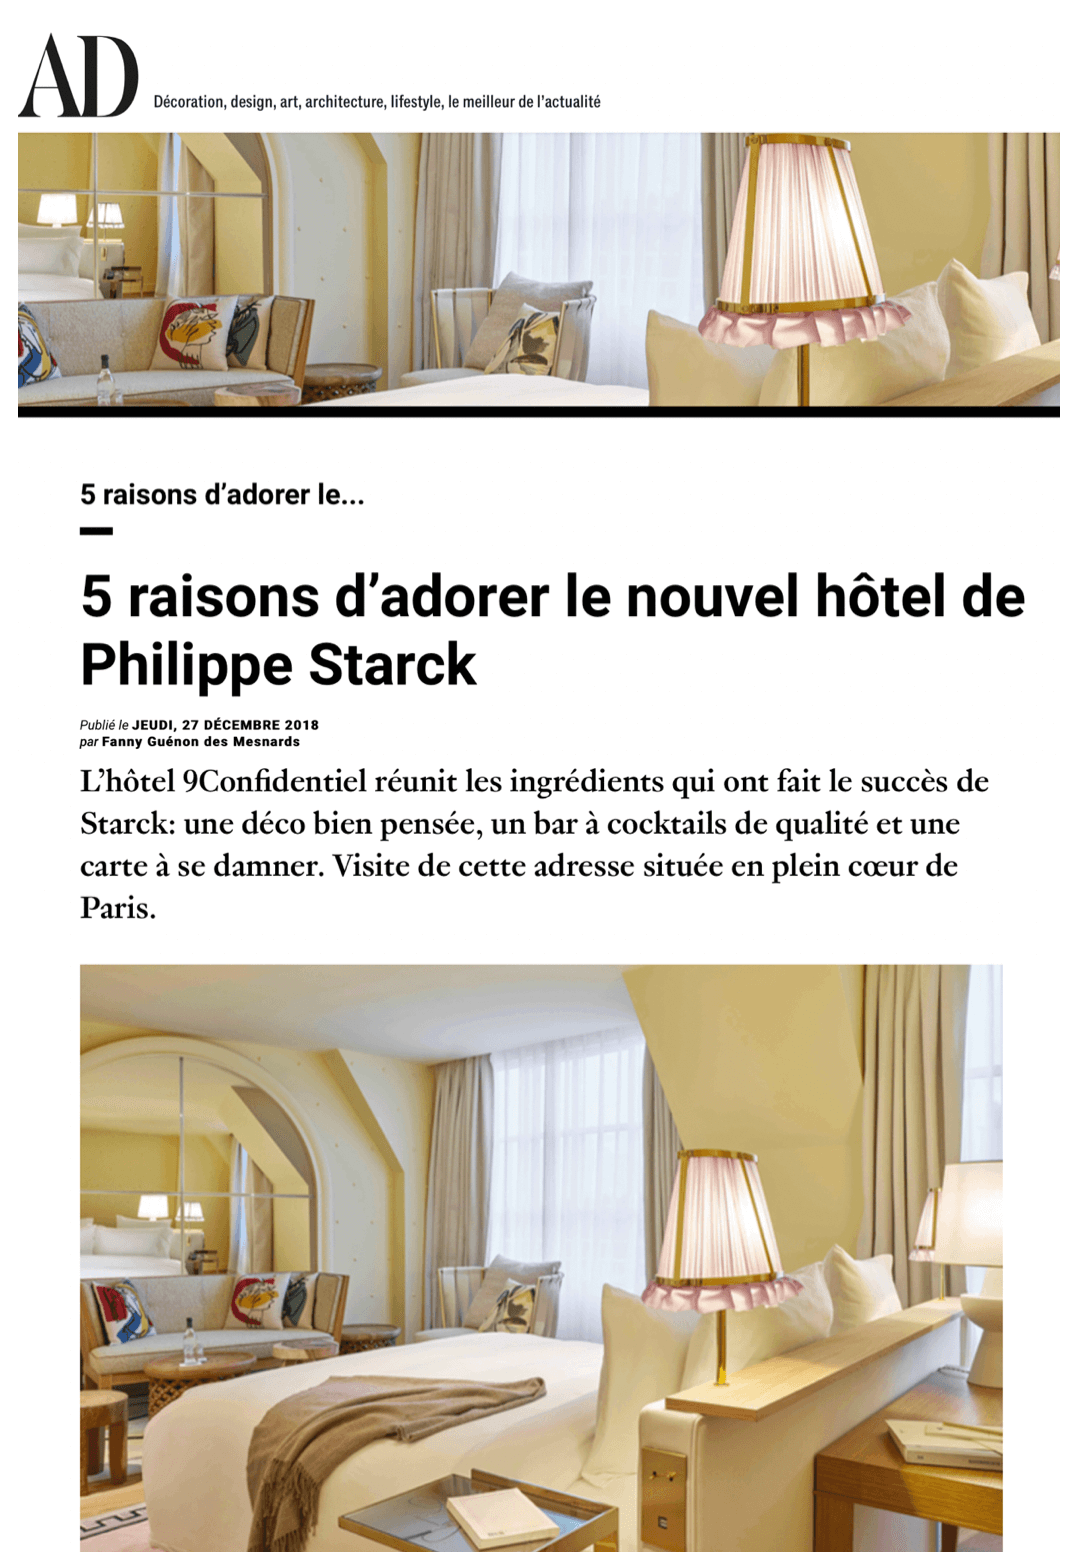 AD - 5 reasons to love 9 Confidentiel, the new hotel of Philippe Starck